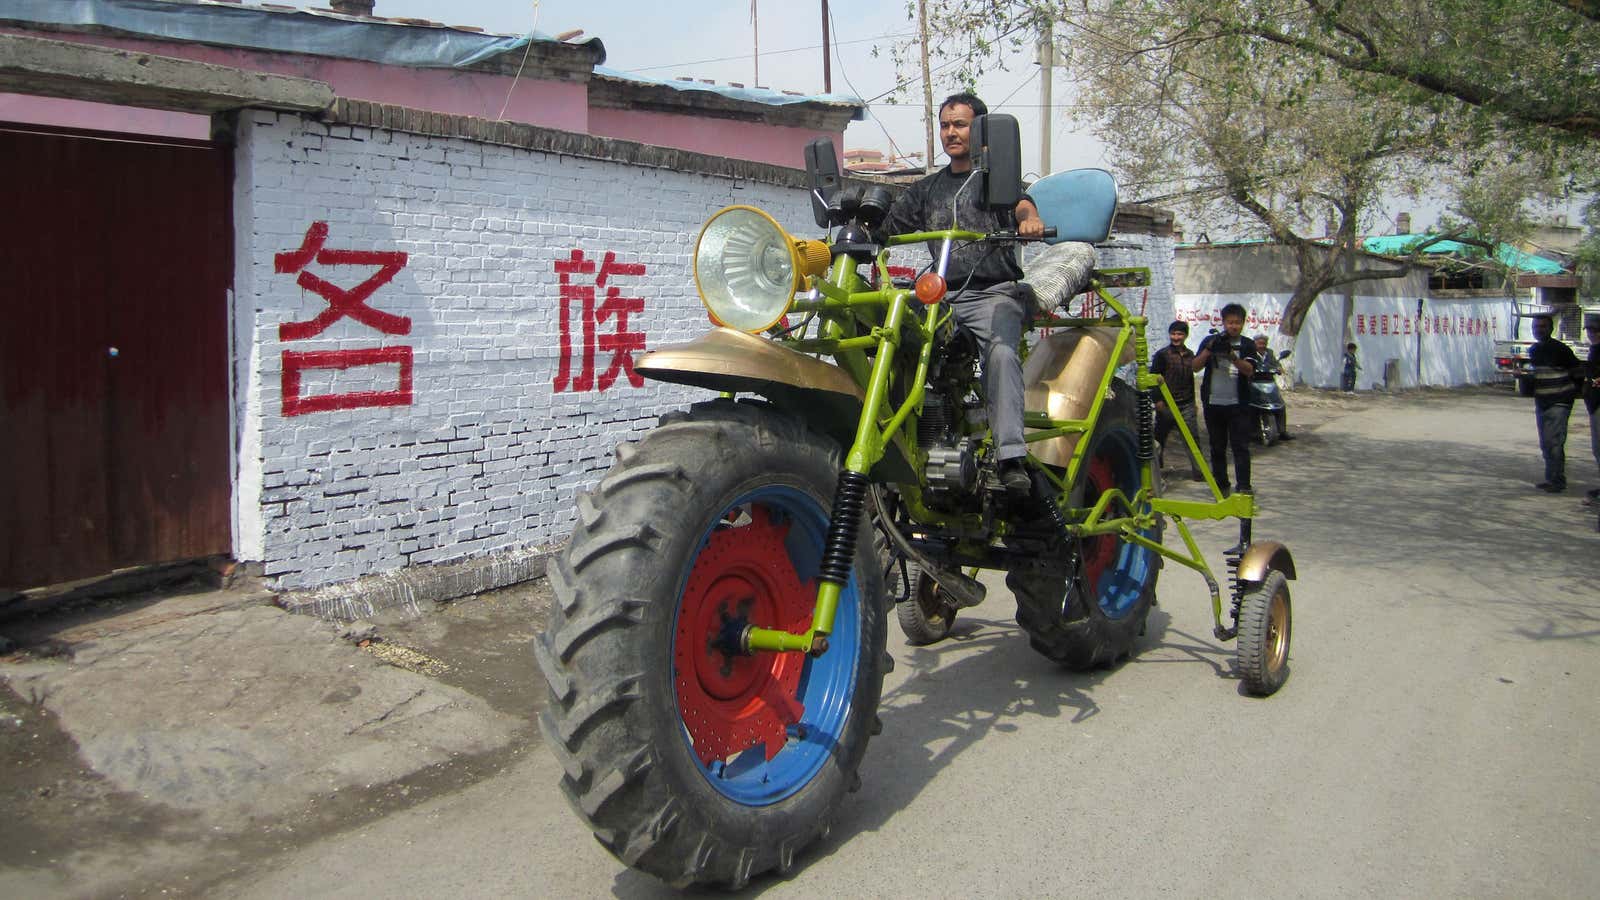 A man in Manas county, in Xinjiang, drives a motorcycle he made from scrap parts and a second-hand engine.